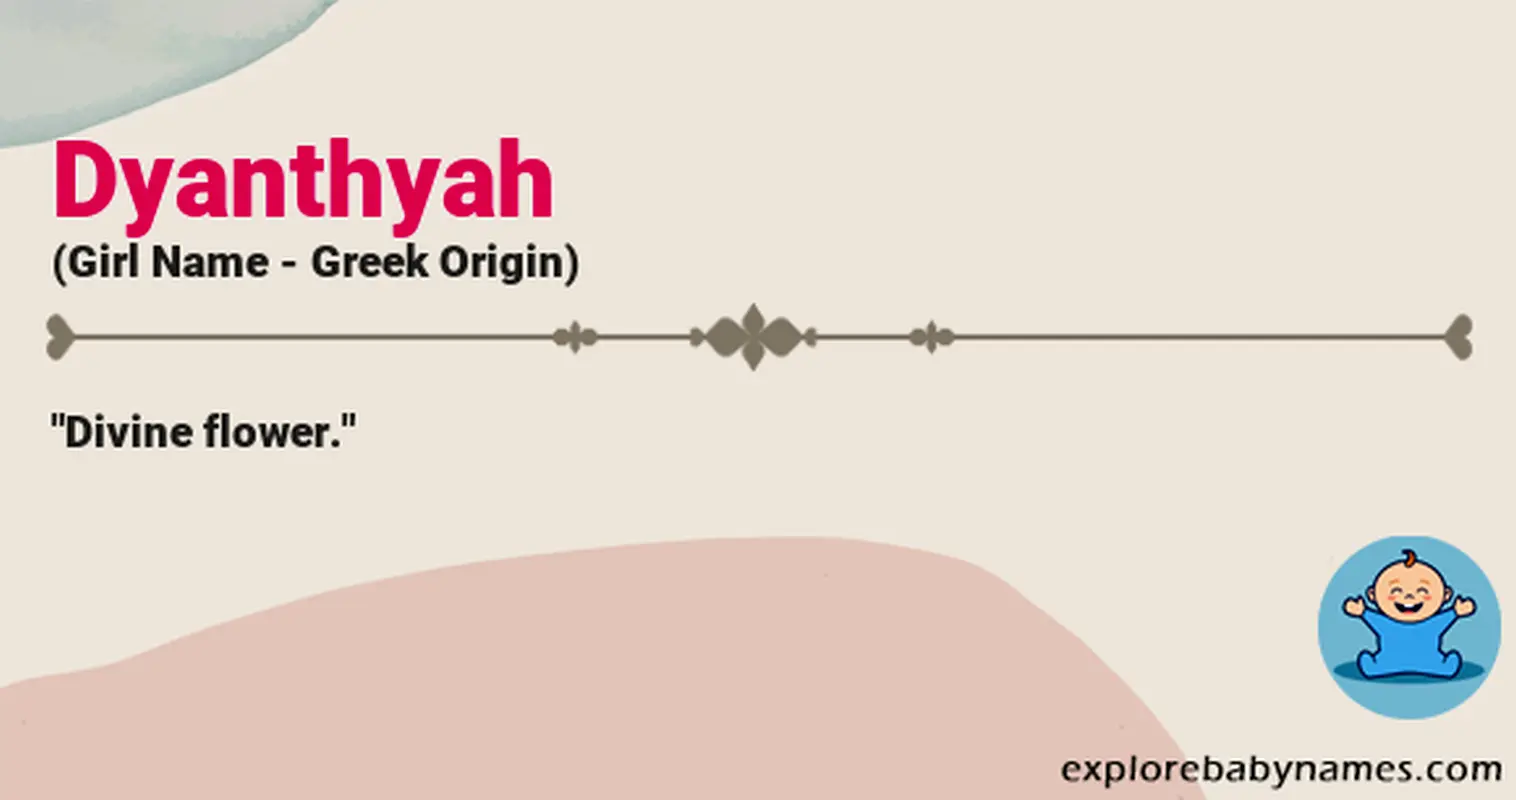 Meaning of Dyanthyah